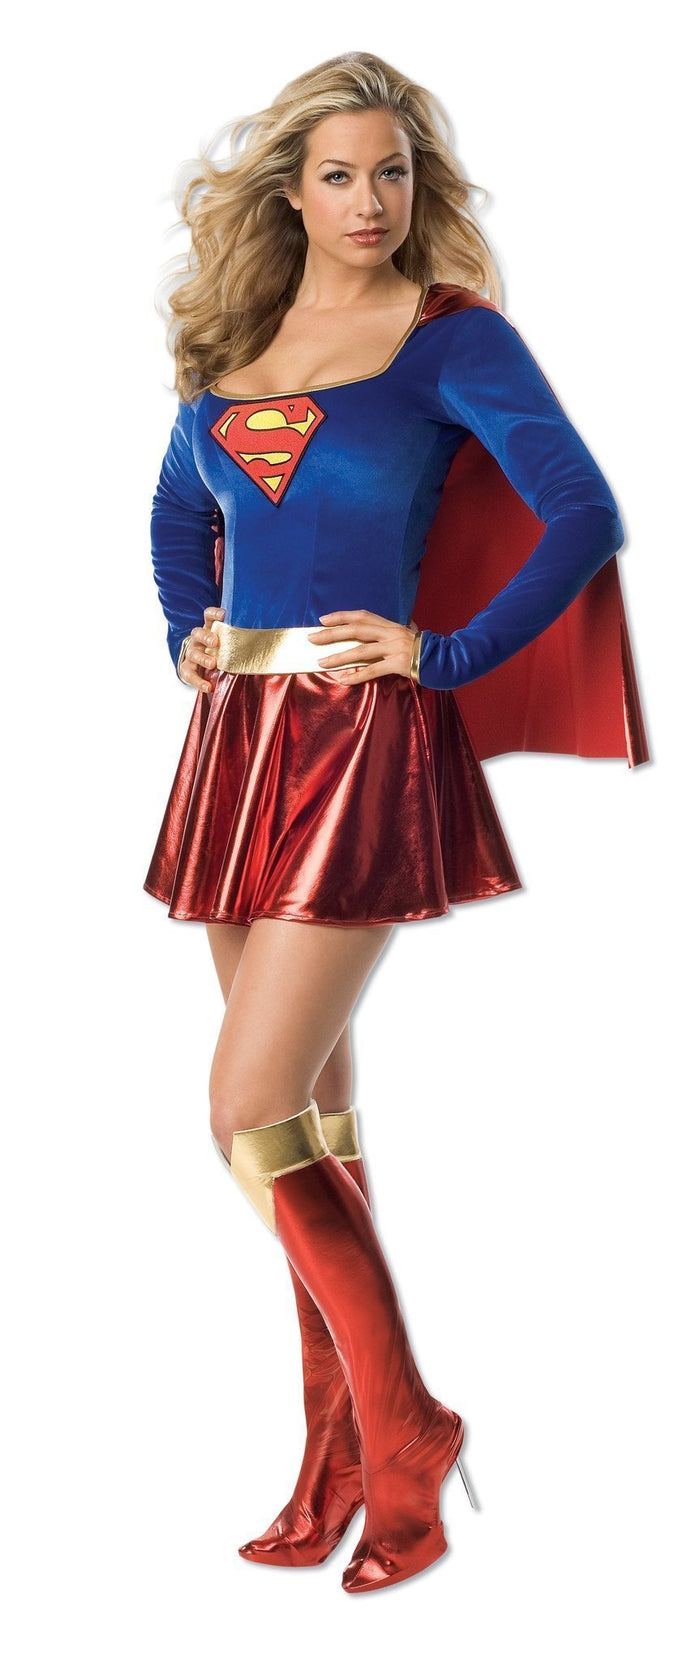 Supergirl Secret Wishes Deluxe Costume for Adults - Warner Bros DC Comics